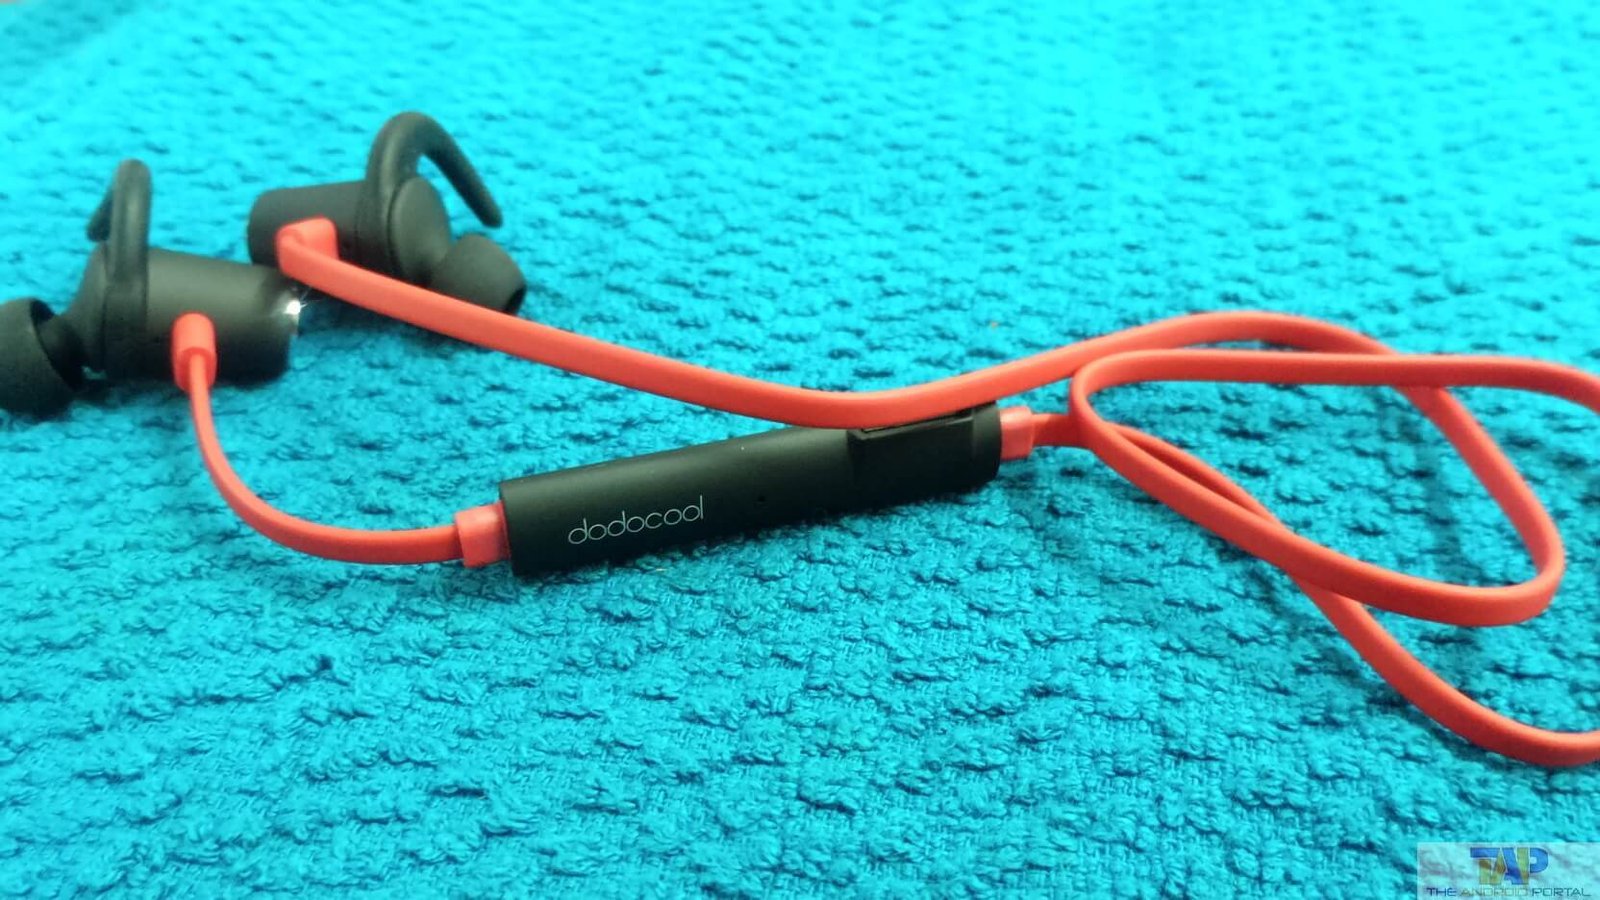 Dodocool Bluetooth earbuds review